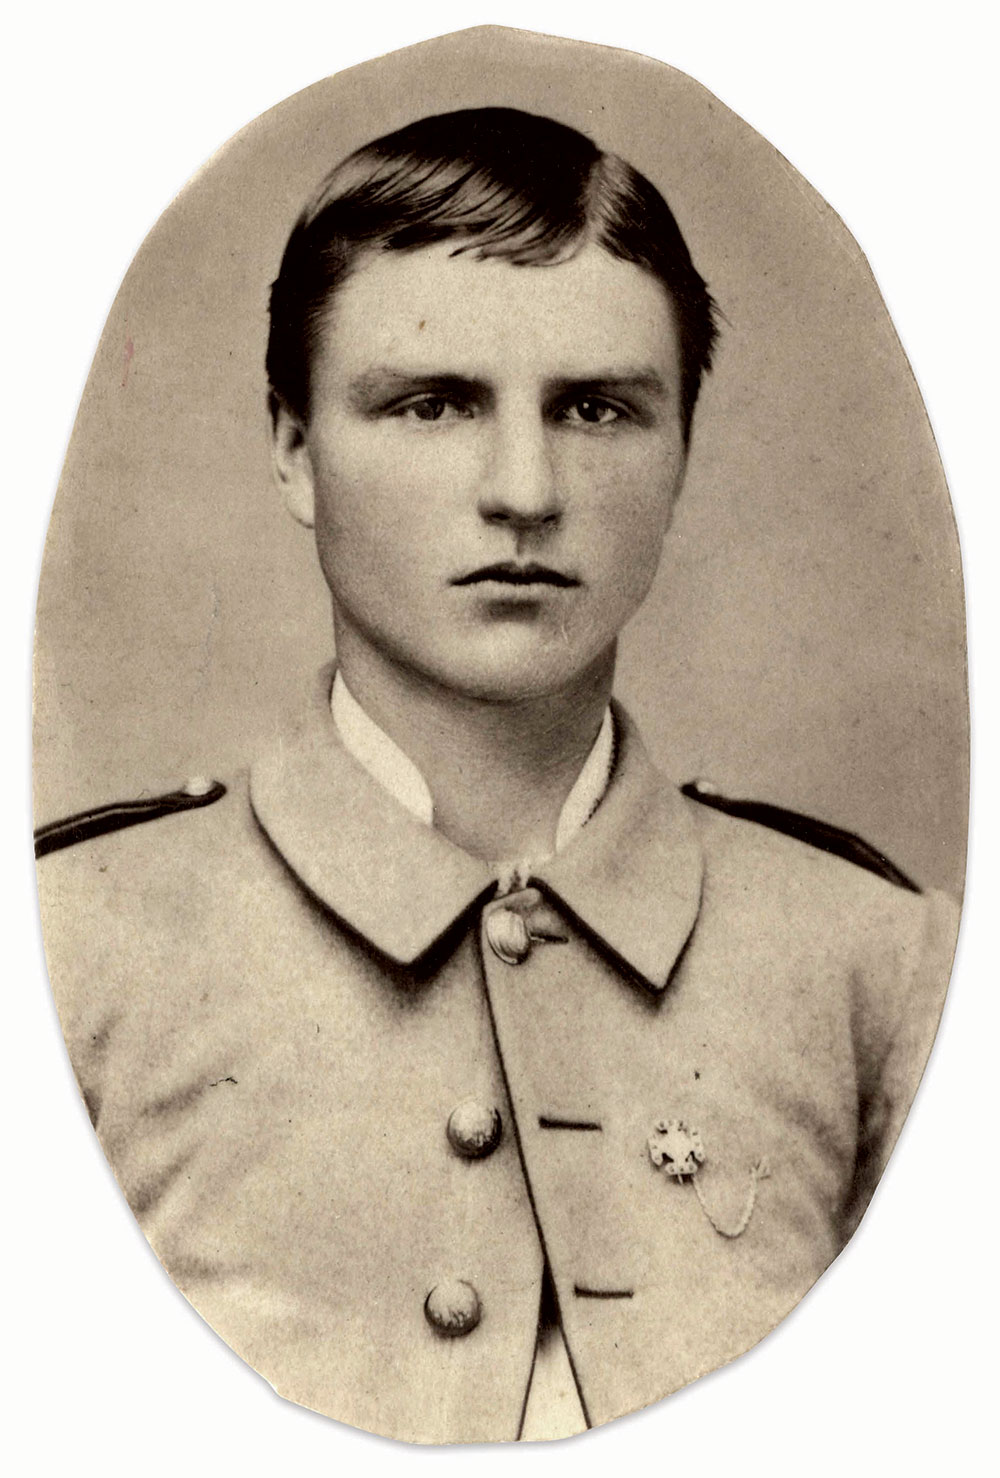 Cadet Gholson C. Harris, Corps of Cadets, Virginia Agricultural and Mechanical College (now Virginia Tech), ca. 1881-1883. Albumen print. Special Collections and University Archives, University Libraries, Virginia Tech. Used with permission.